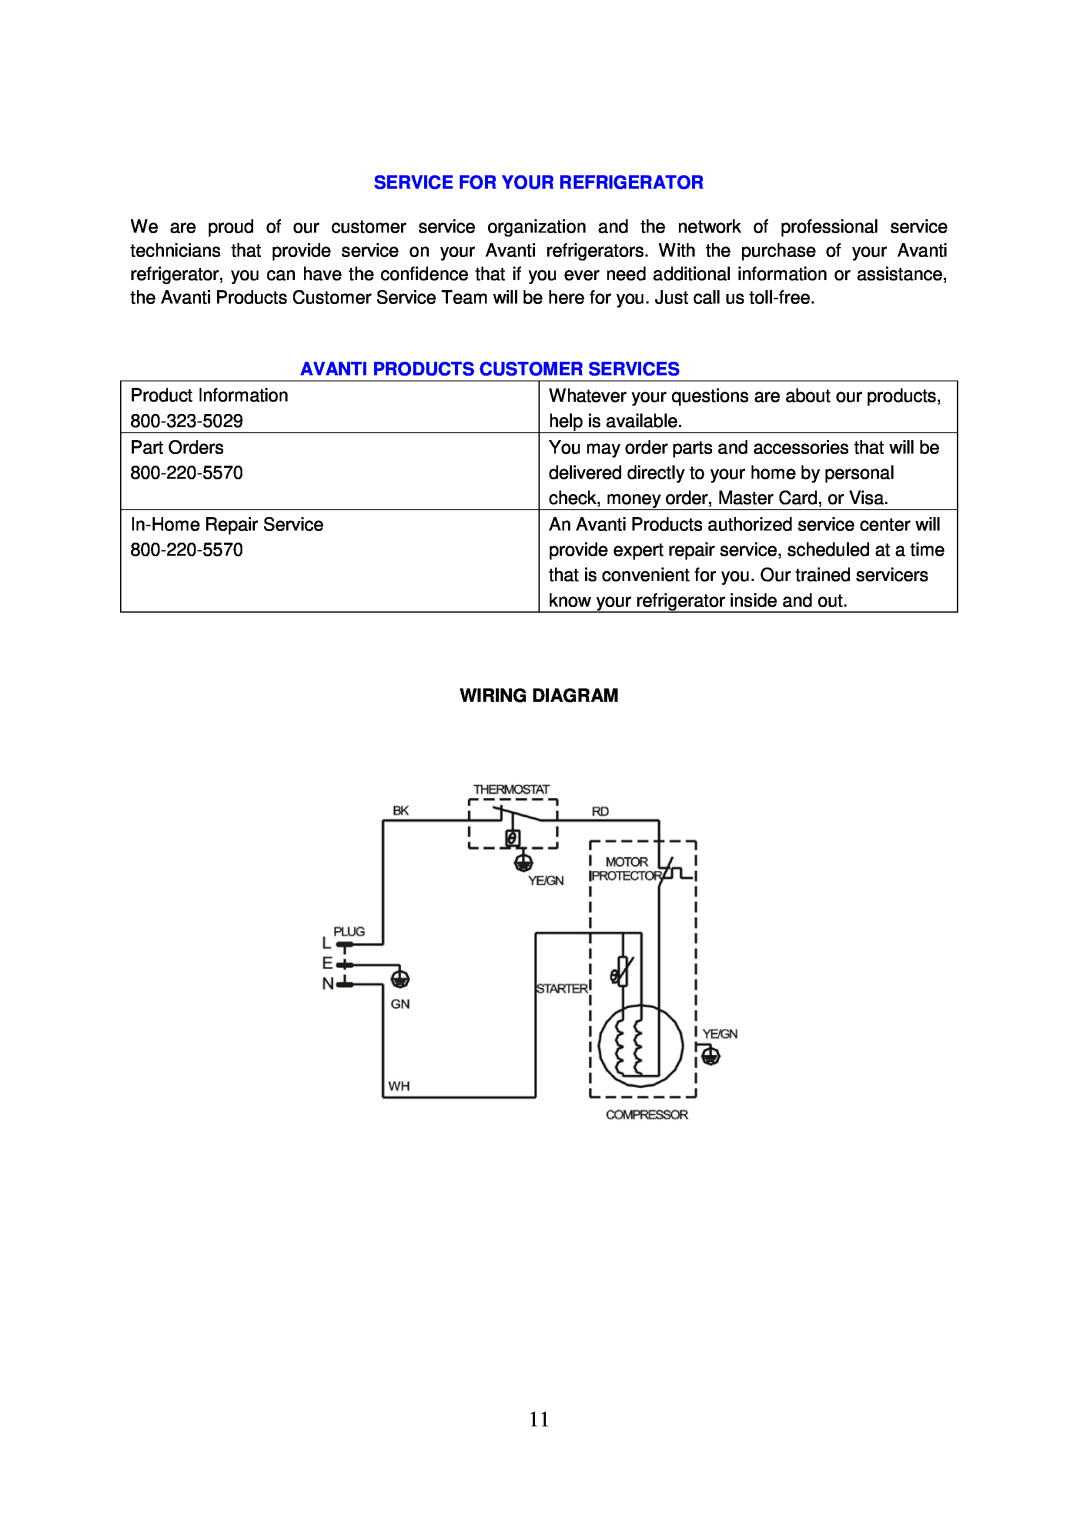 Avanti BCA3281B instruction manual Service For Your Refrigerator, Avanti Products Customer Services, Wiring Diagram 